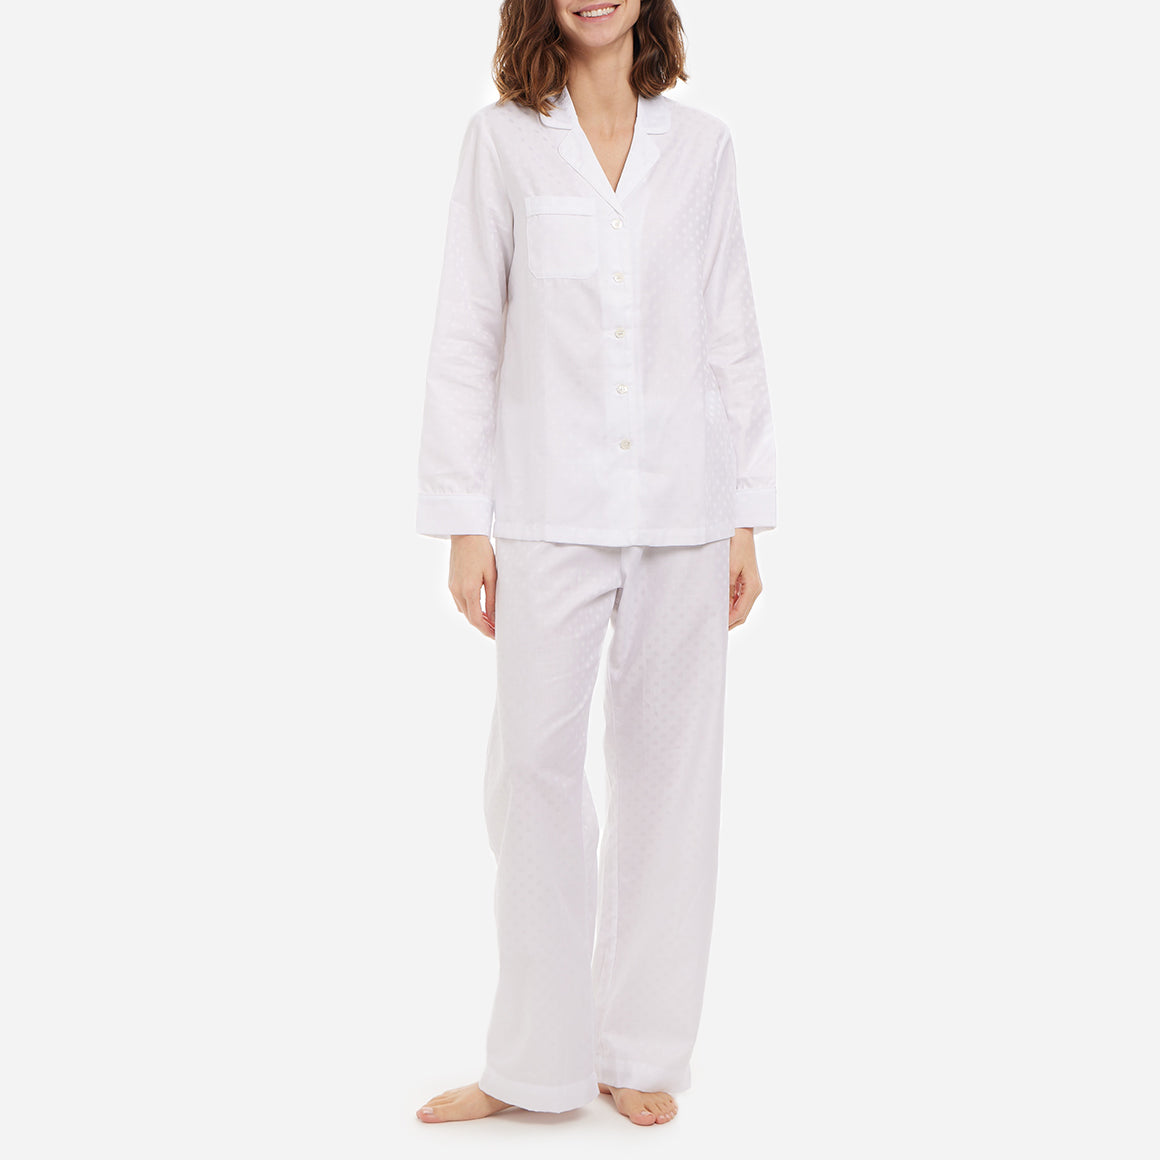 A front-facing model is wearing a long pajama set made of white polka dot cotton jacquard.